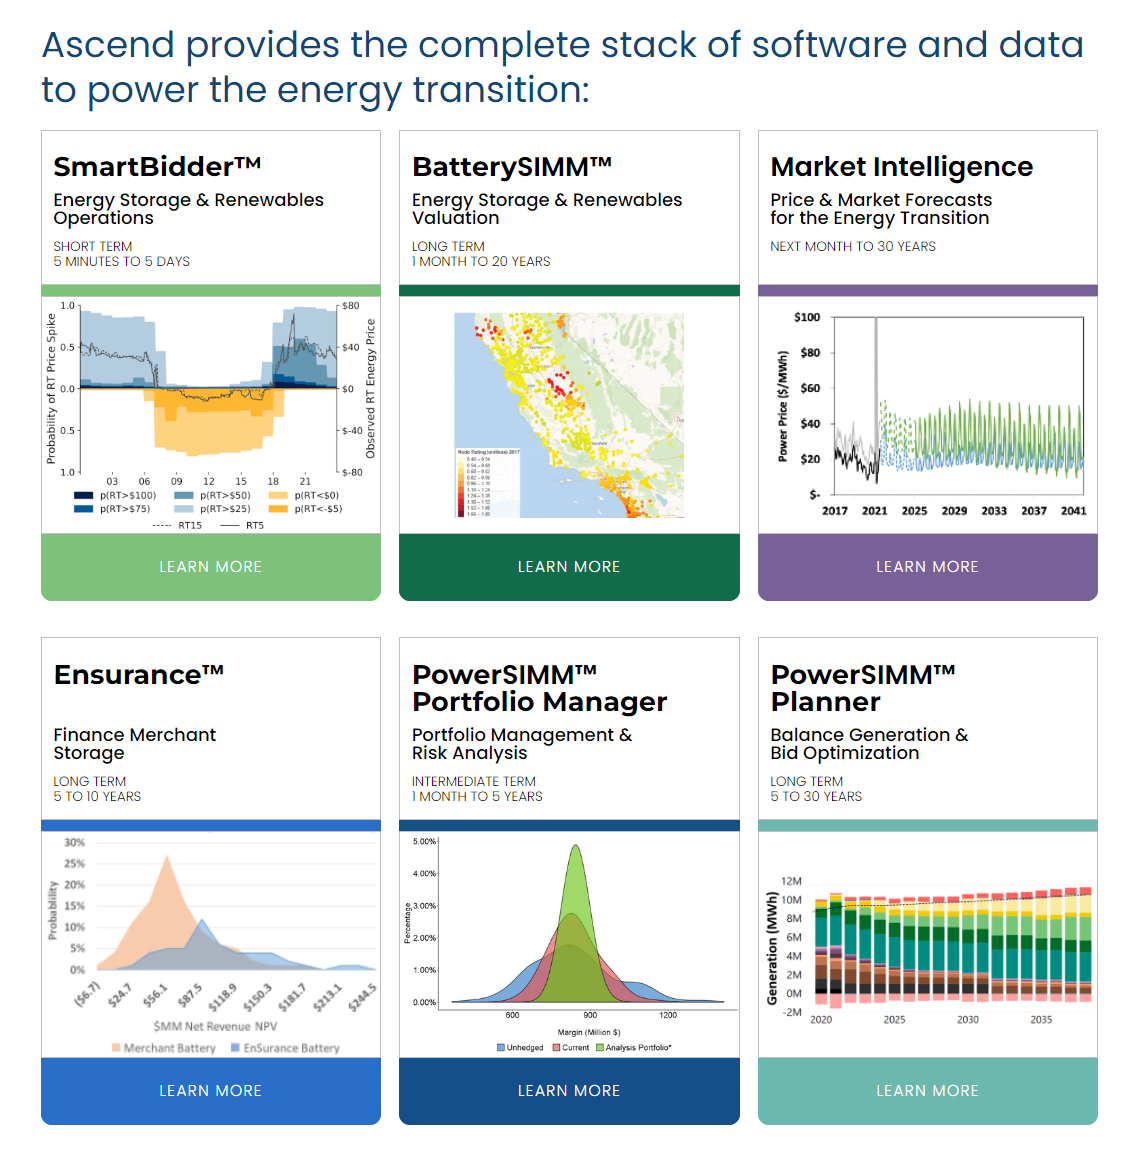 Ascend Analytics product / service